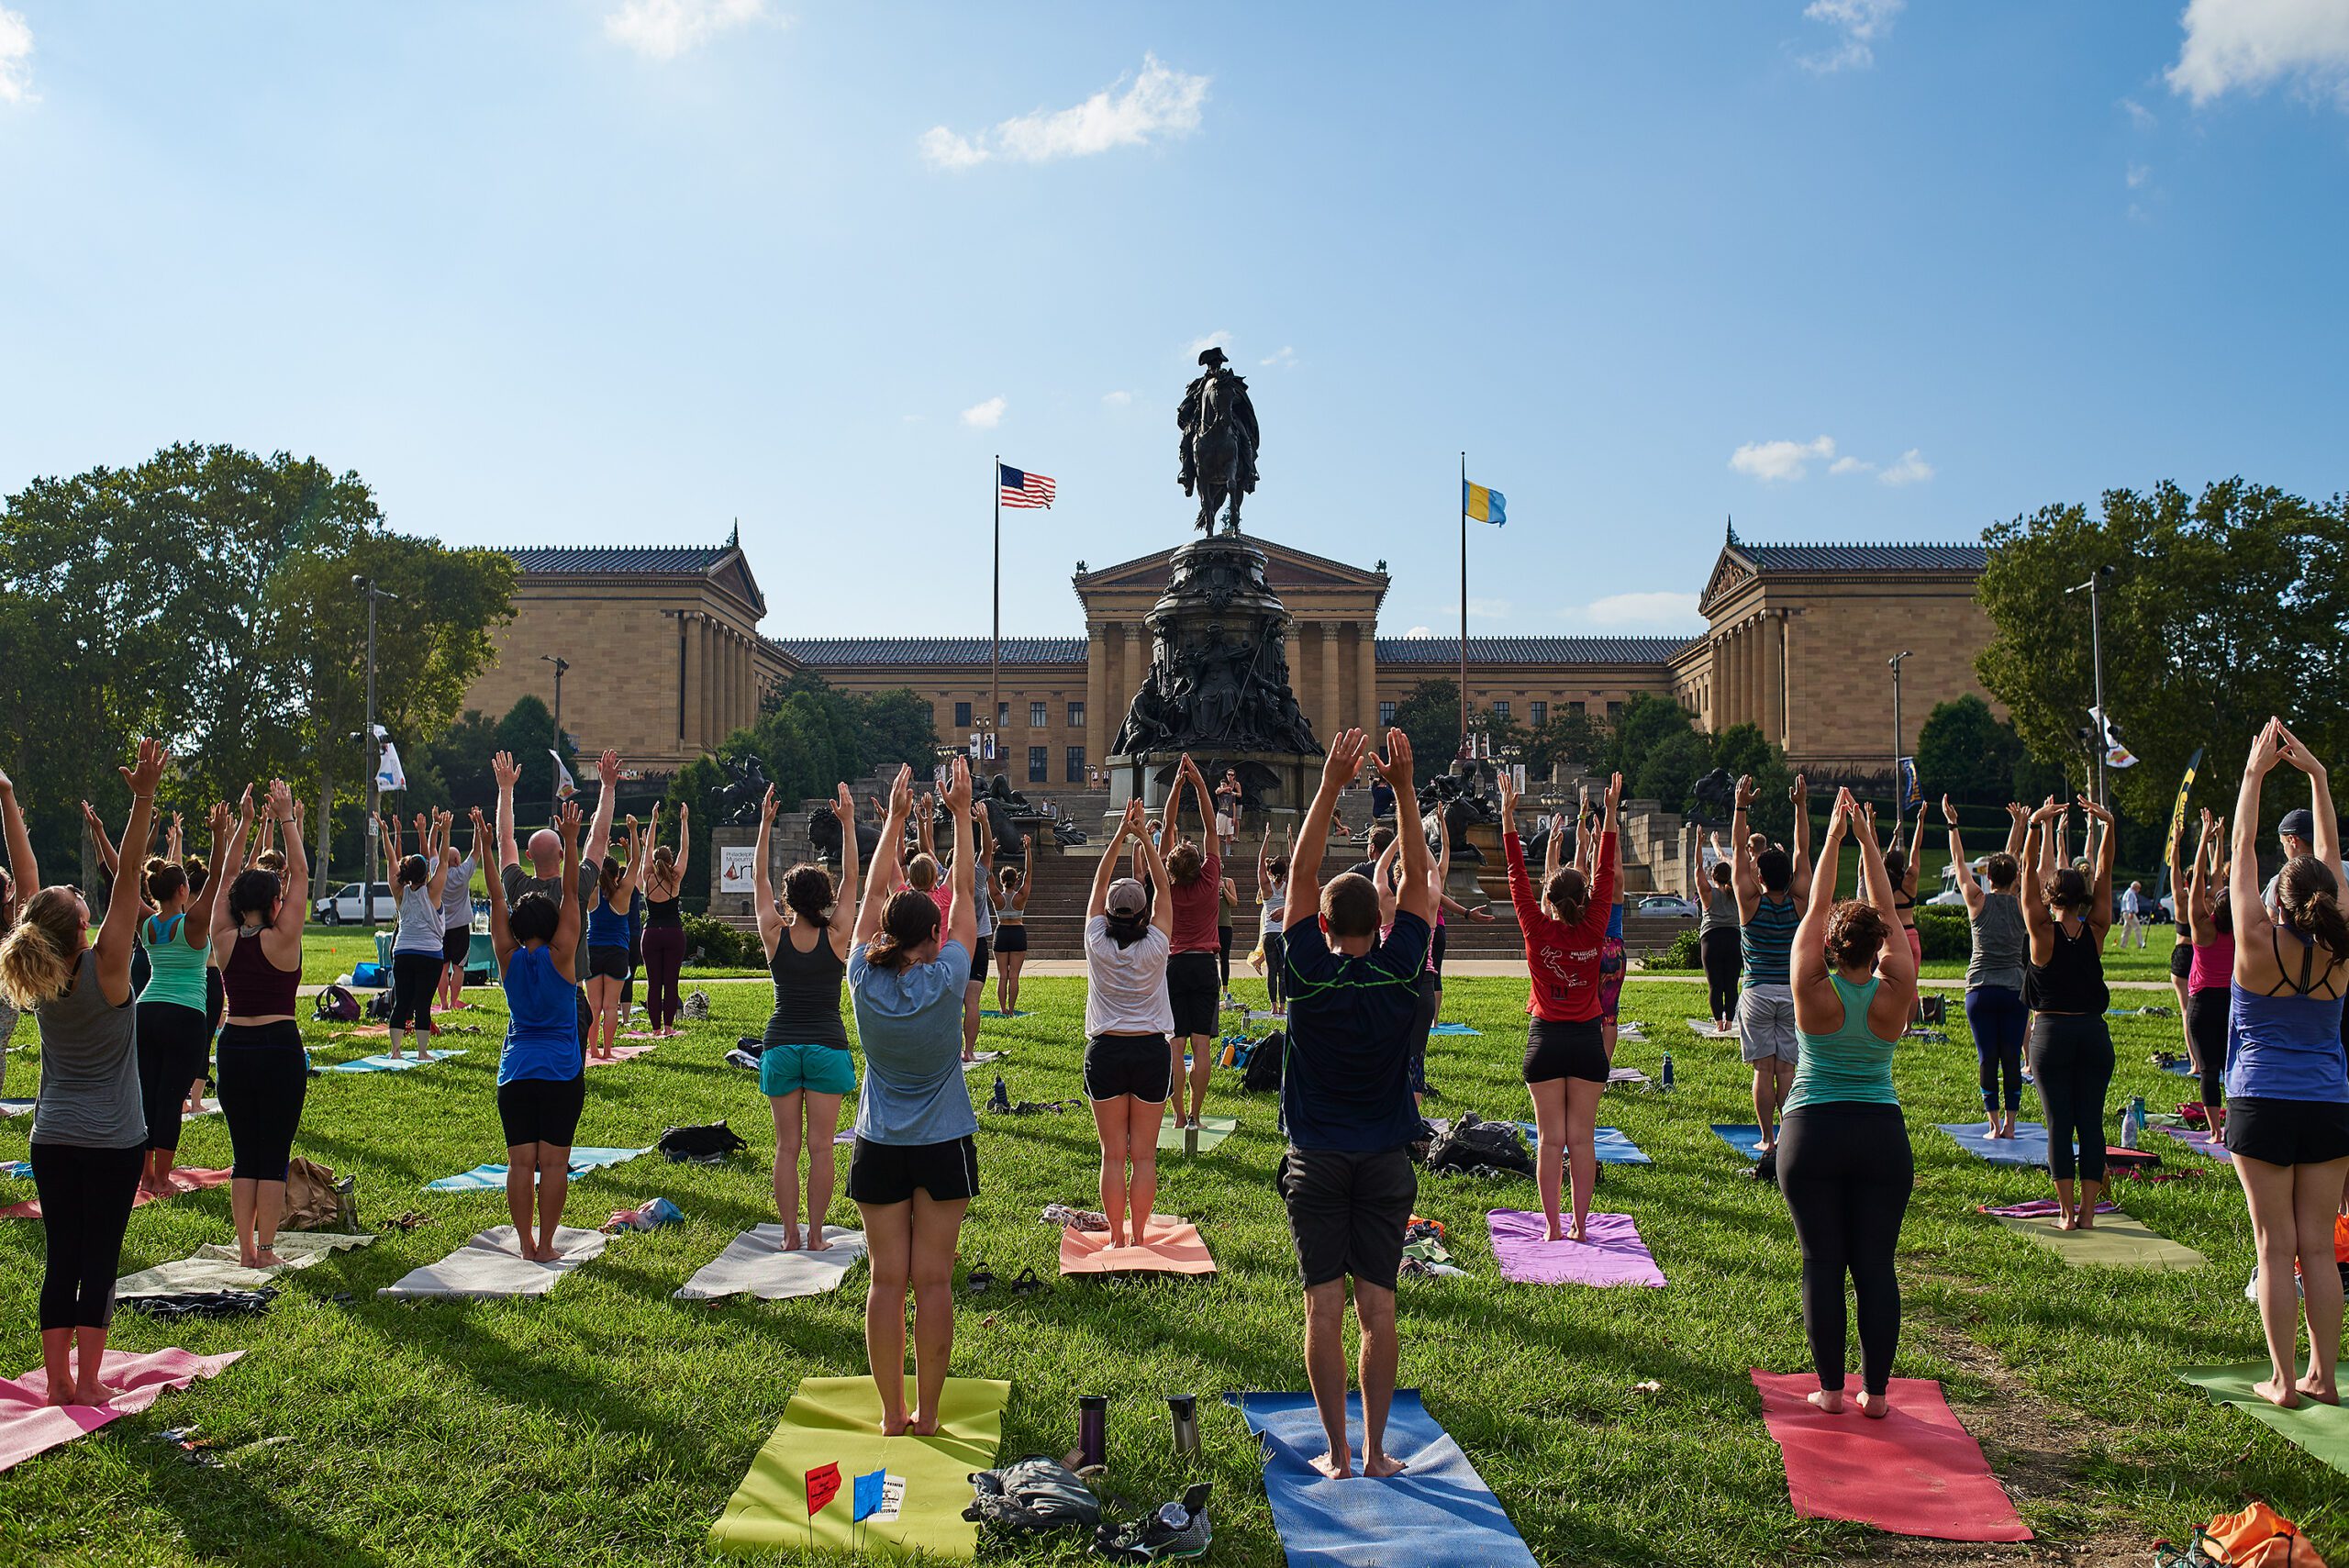 A group does yoga on a lawn in front of the Philadelphia Museum of Art.